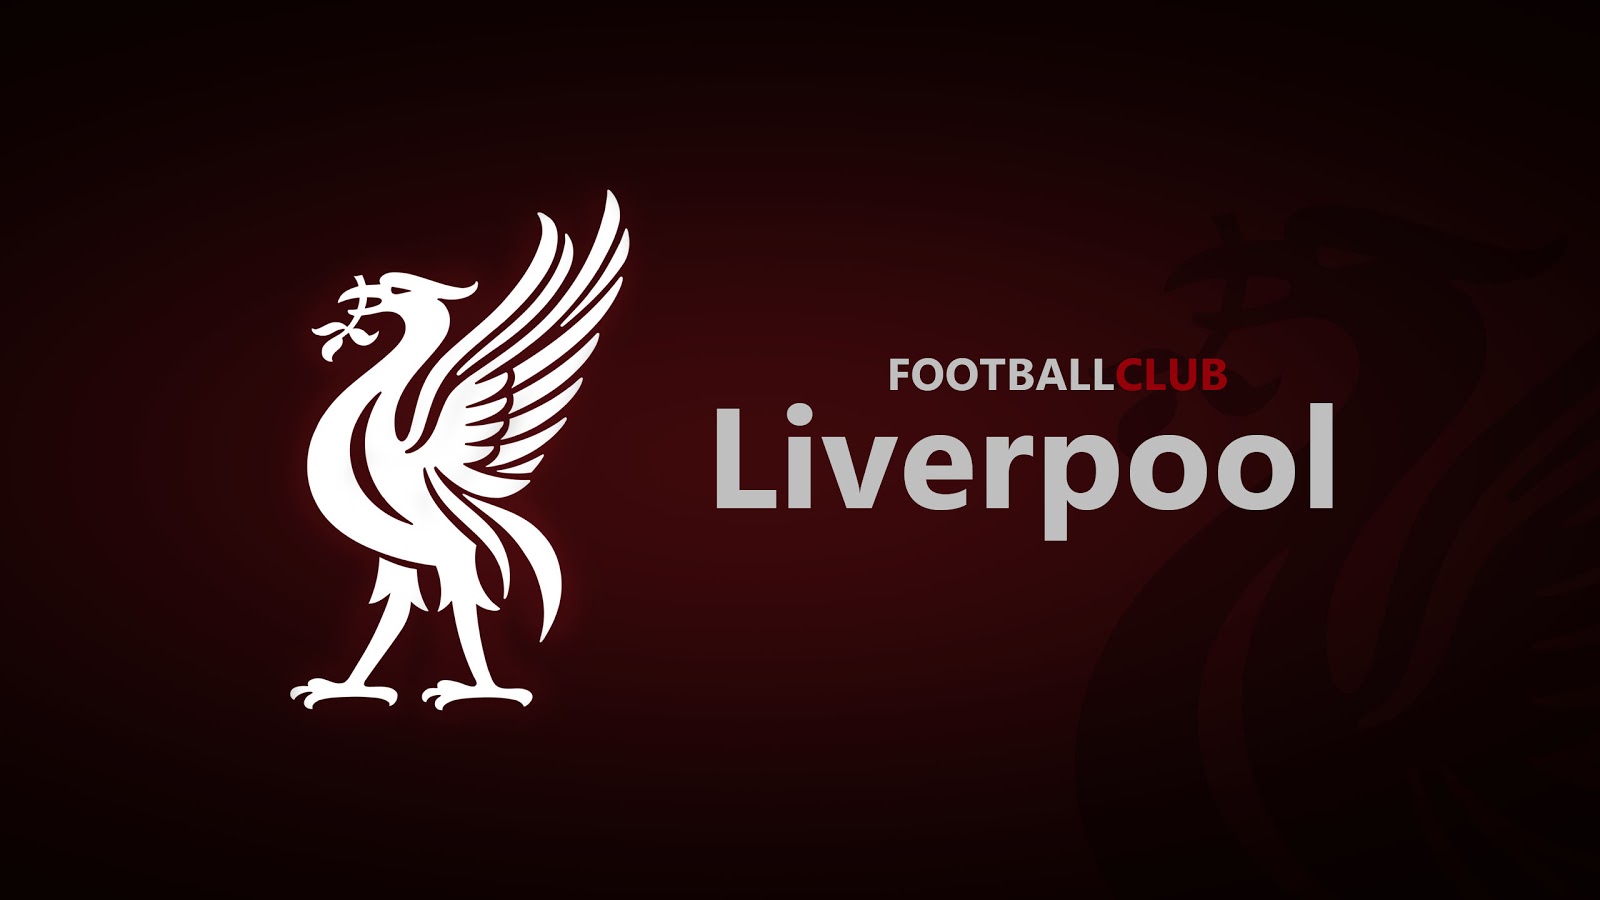 The Red Liverpool Football Club Logo - Game Of Thrones Original House - HD Wallpaper 